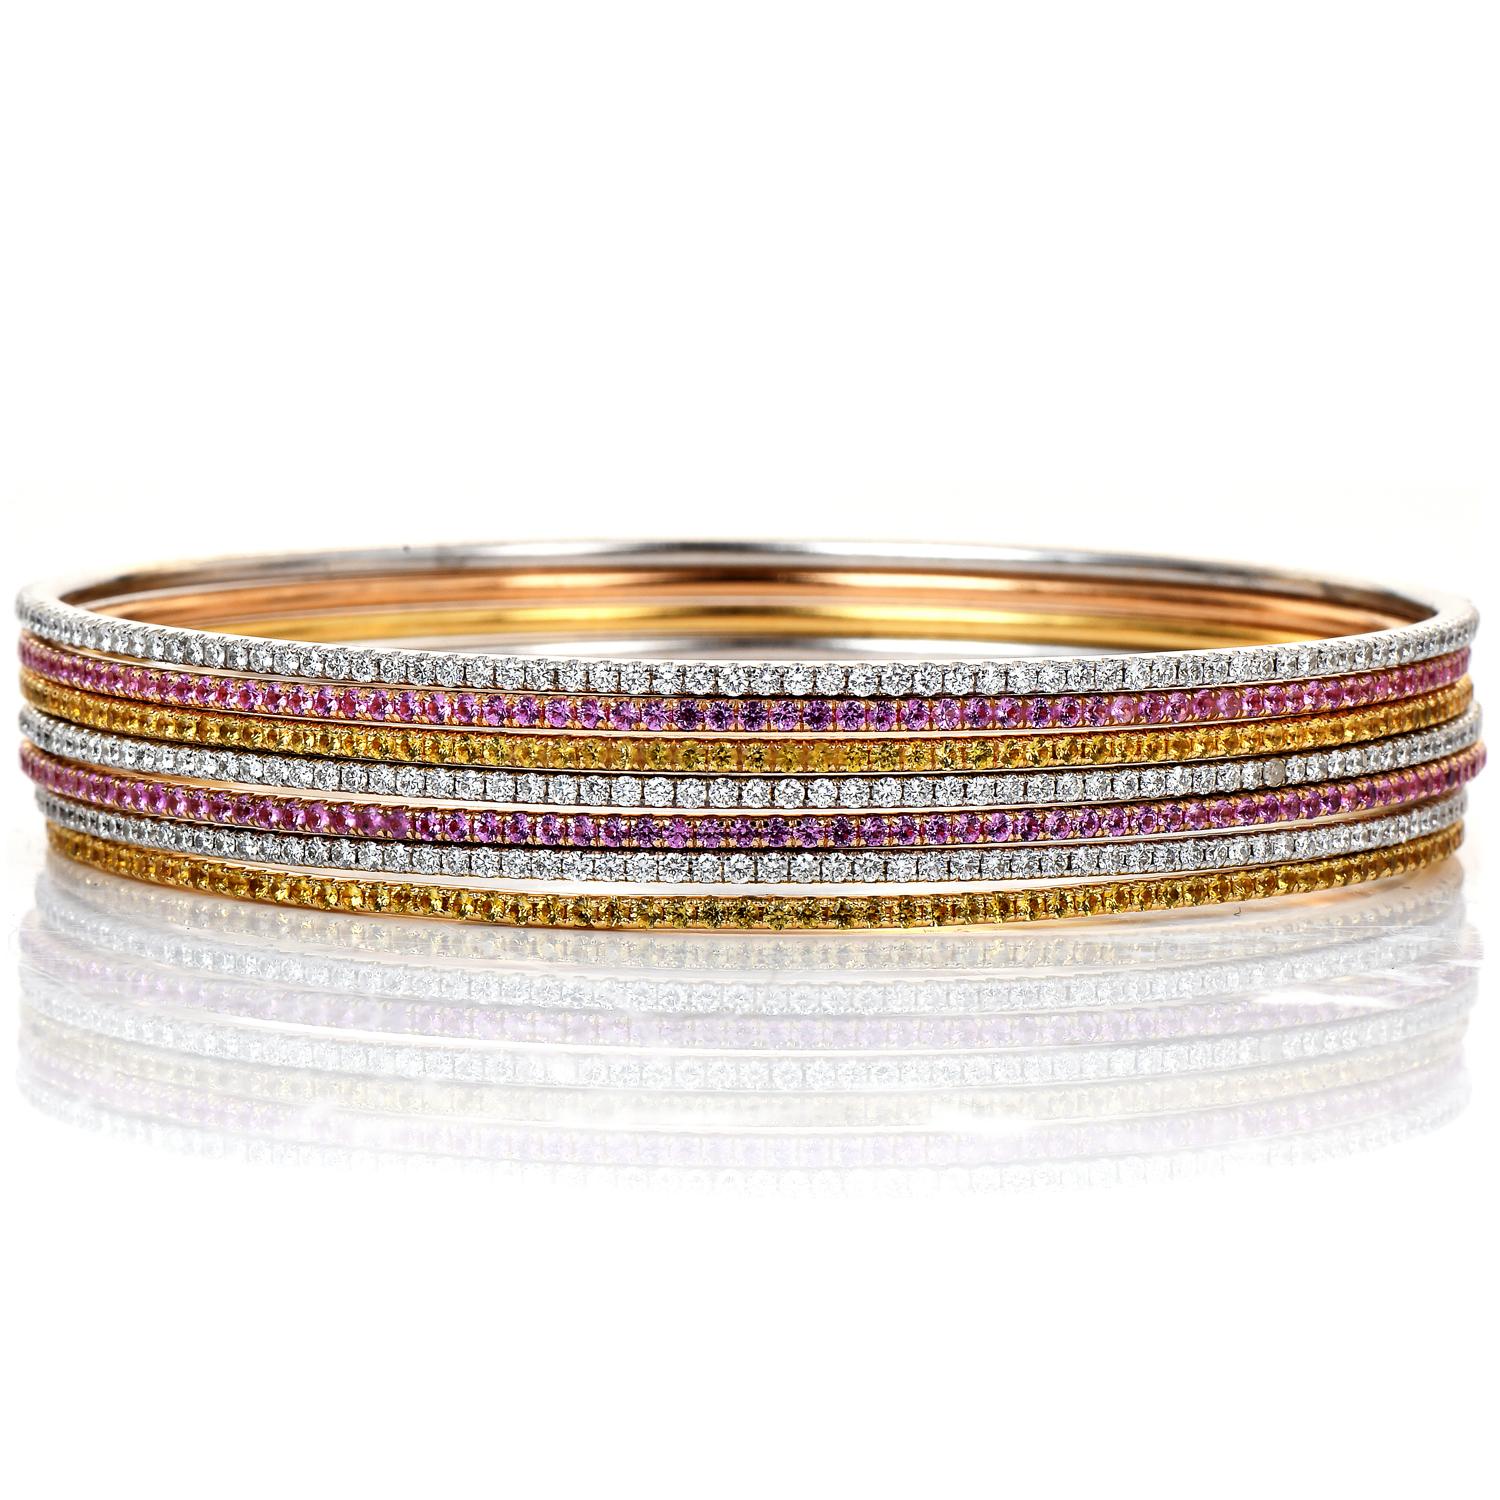 A timeless bracelet set, perfect for everyday use!

These stackable bangle bracelets are crafted in solid 18K yellow, white & rose gold and measure 8 inches around the wrist. This set is composed of seven gold bangles, from the classic 